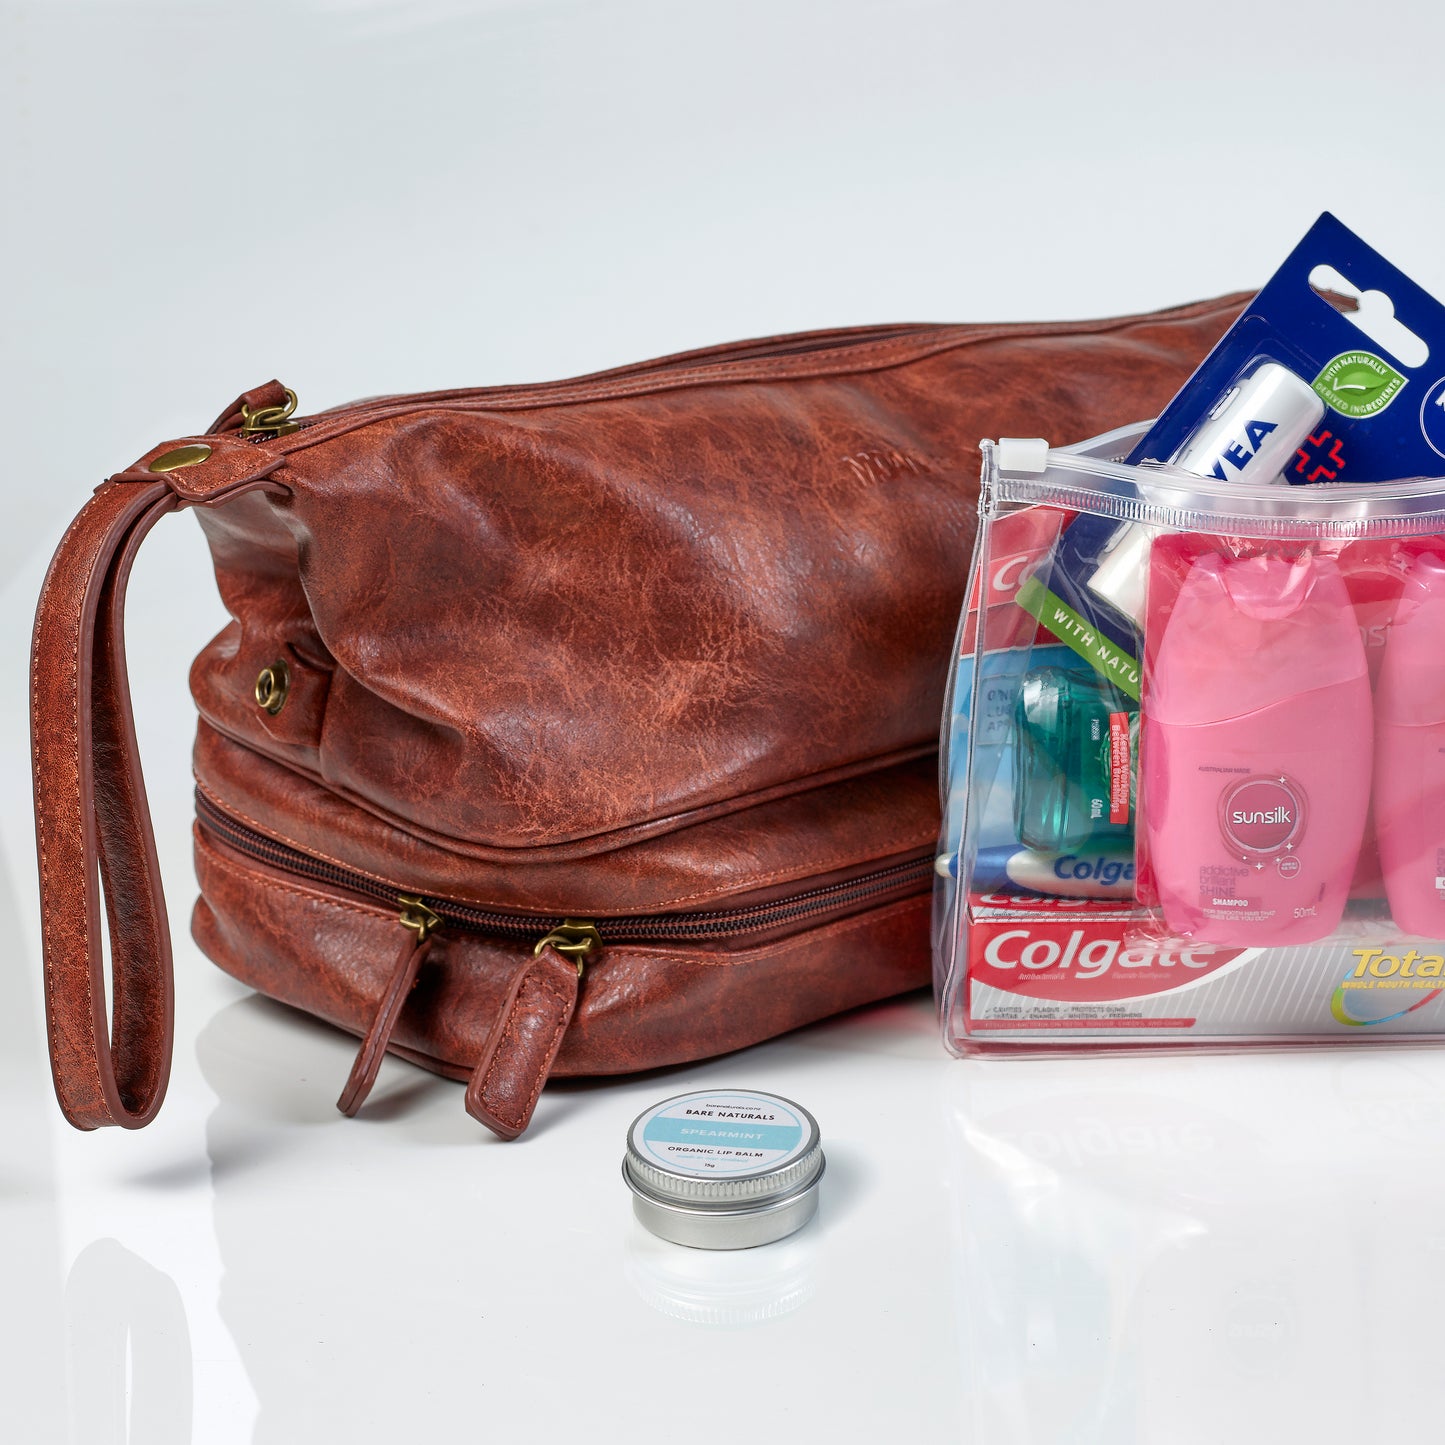 Hospital Stay Essentials Package